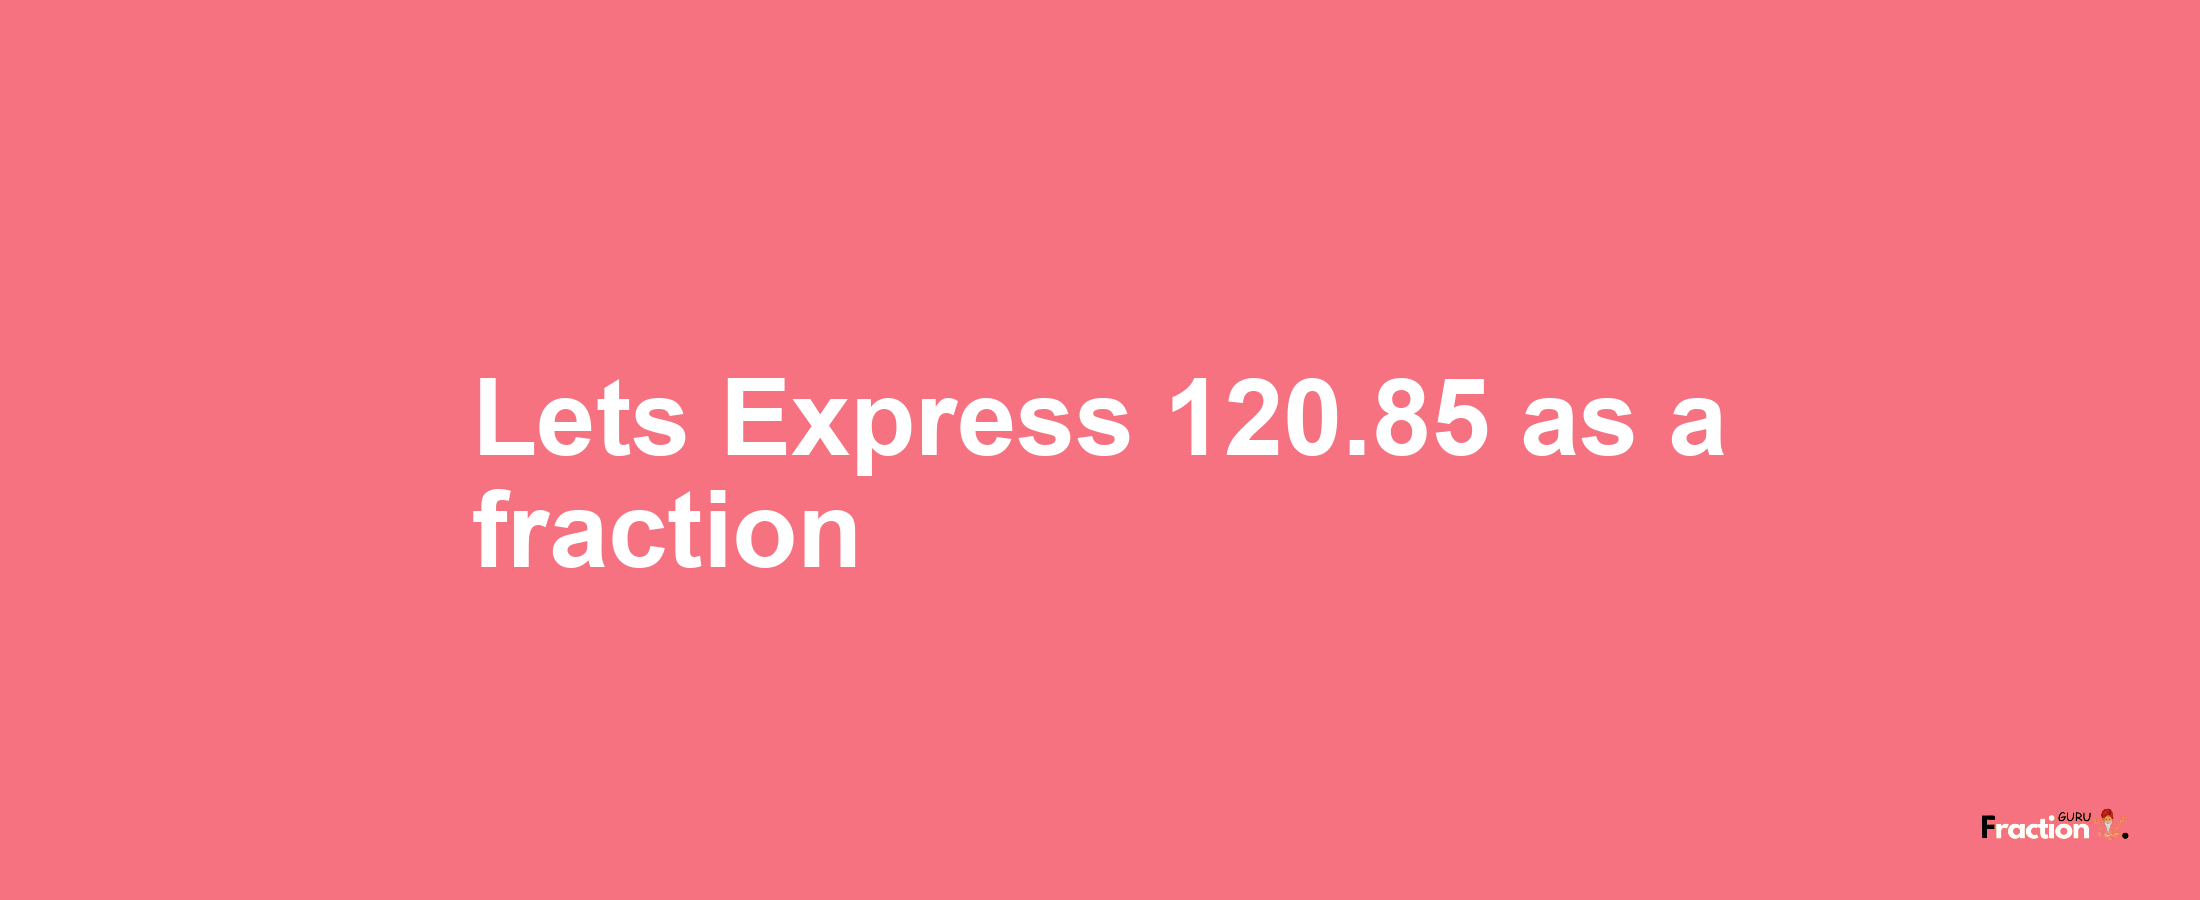 Lets Express 120.85 as afraction